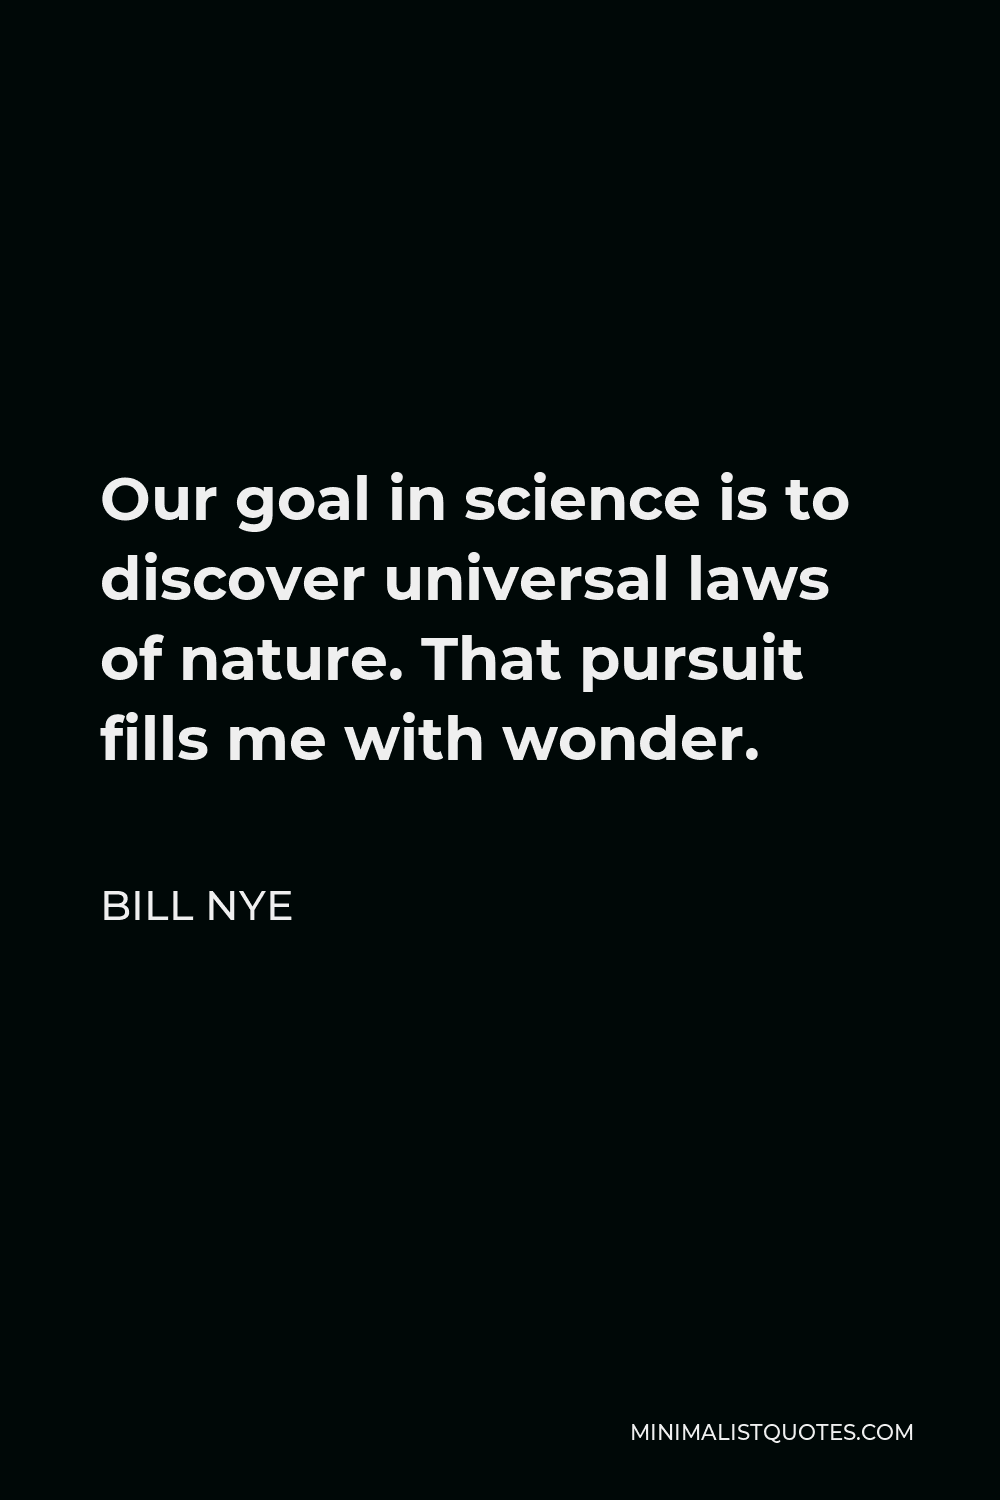 Bill Nye Quote - Our goal in science is to discover universal laws of nature. If one’s faith requires one to abandon or ignore natural laws, well, that person is going to have trouble reconciling religion and science. Otherwise, there is no any conflict.